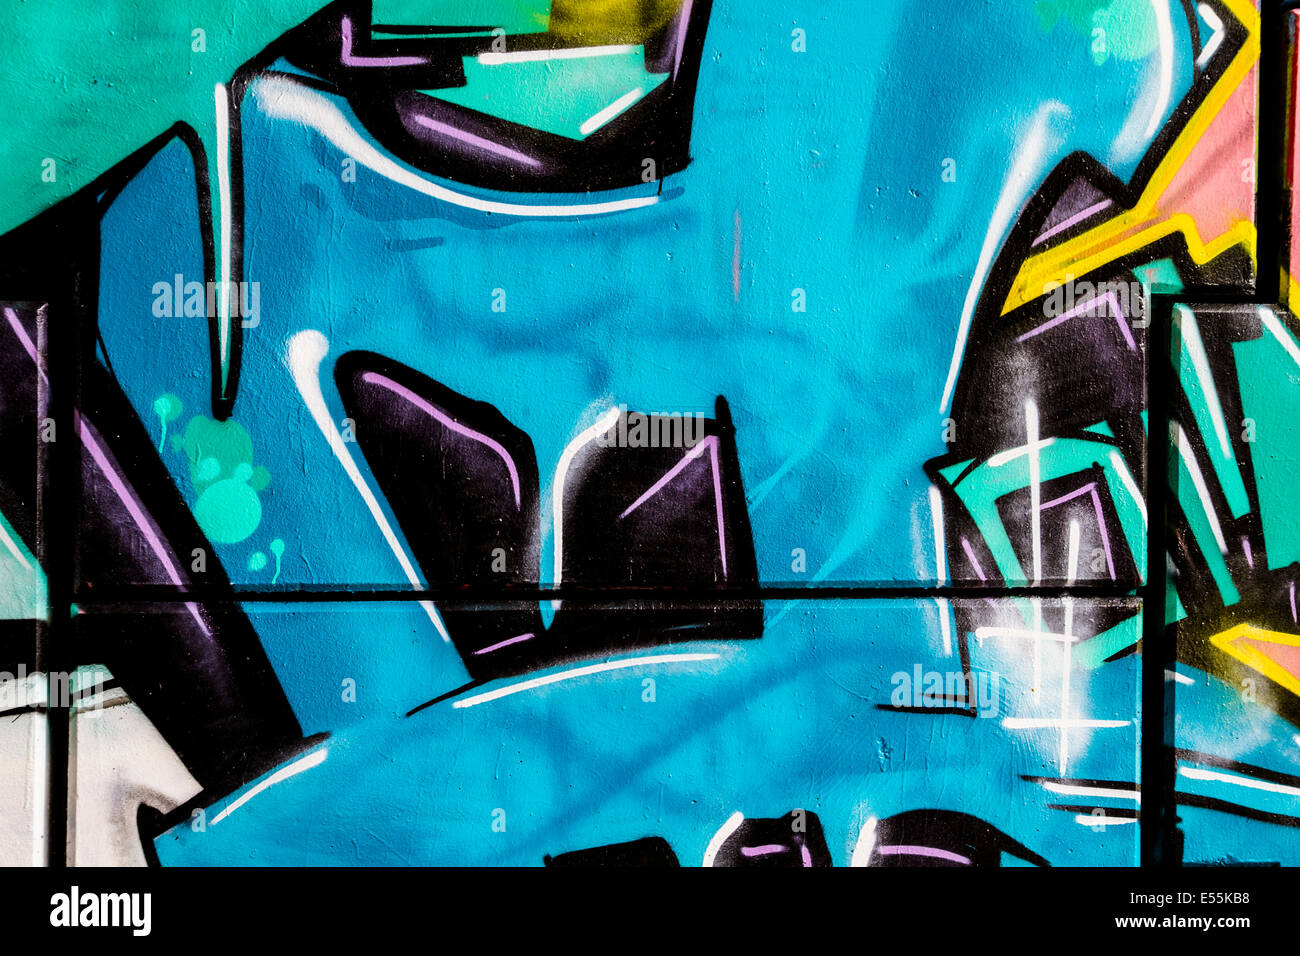 Blue ice, colorful graffiti, abstract grunge grafiti background over textured wall Stock Photo